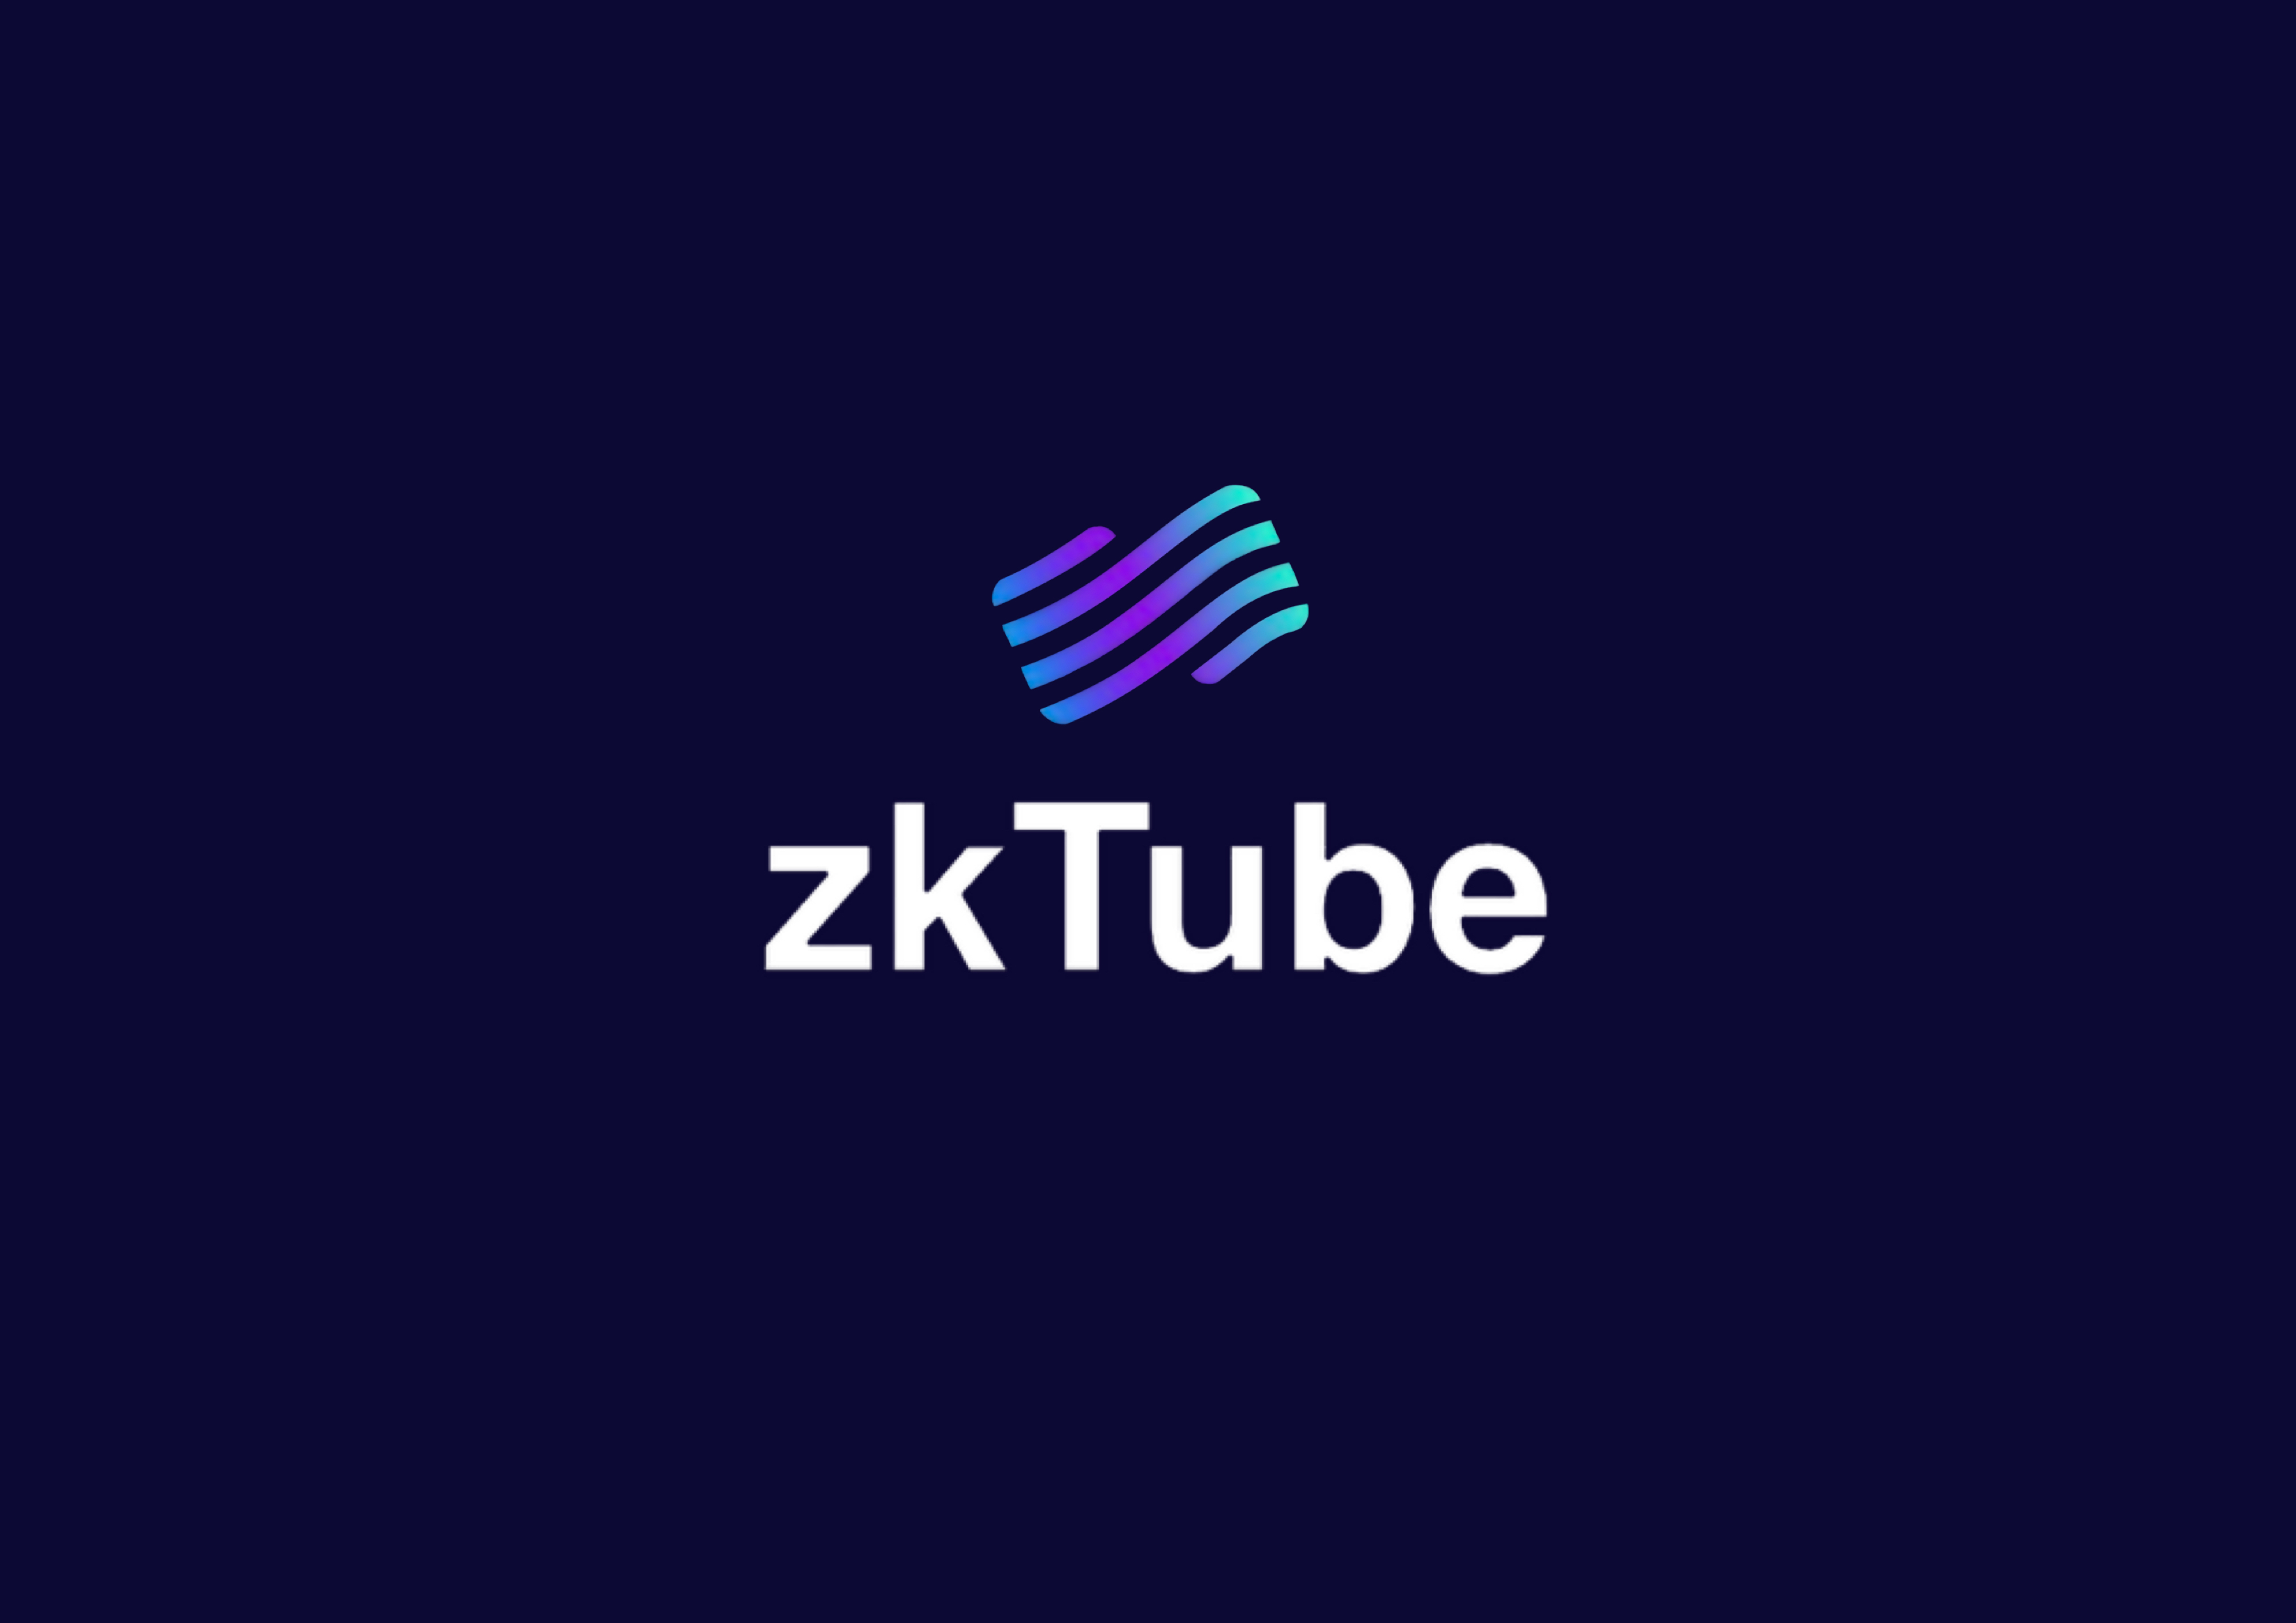 One small step for zkTube, one giant leap for Layer 2